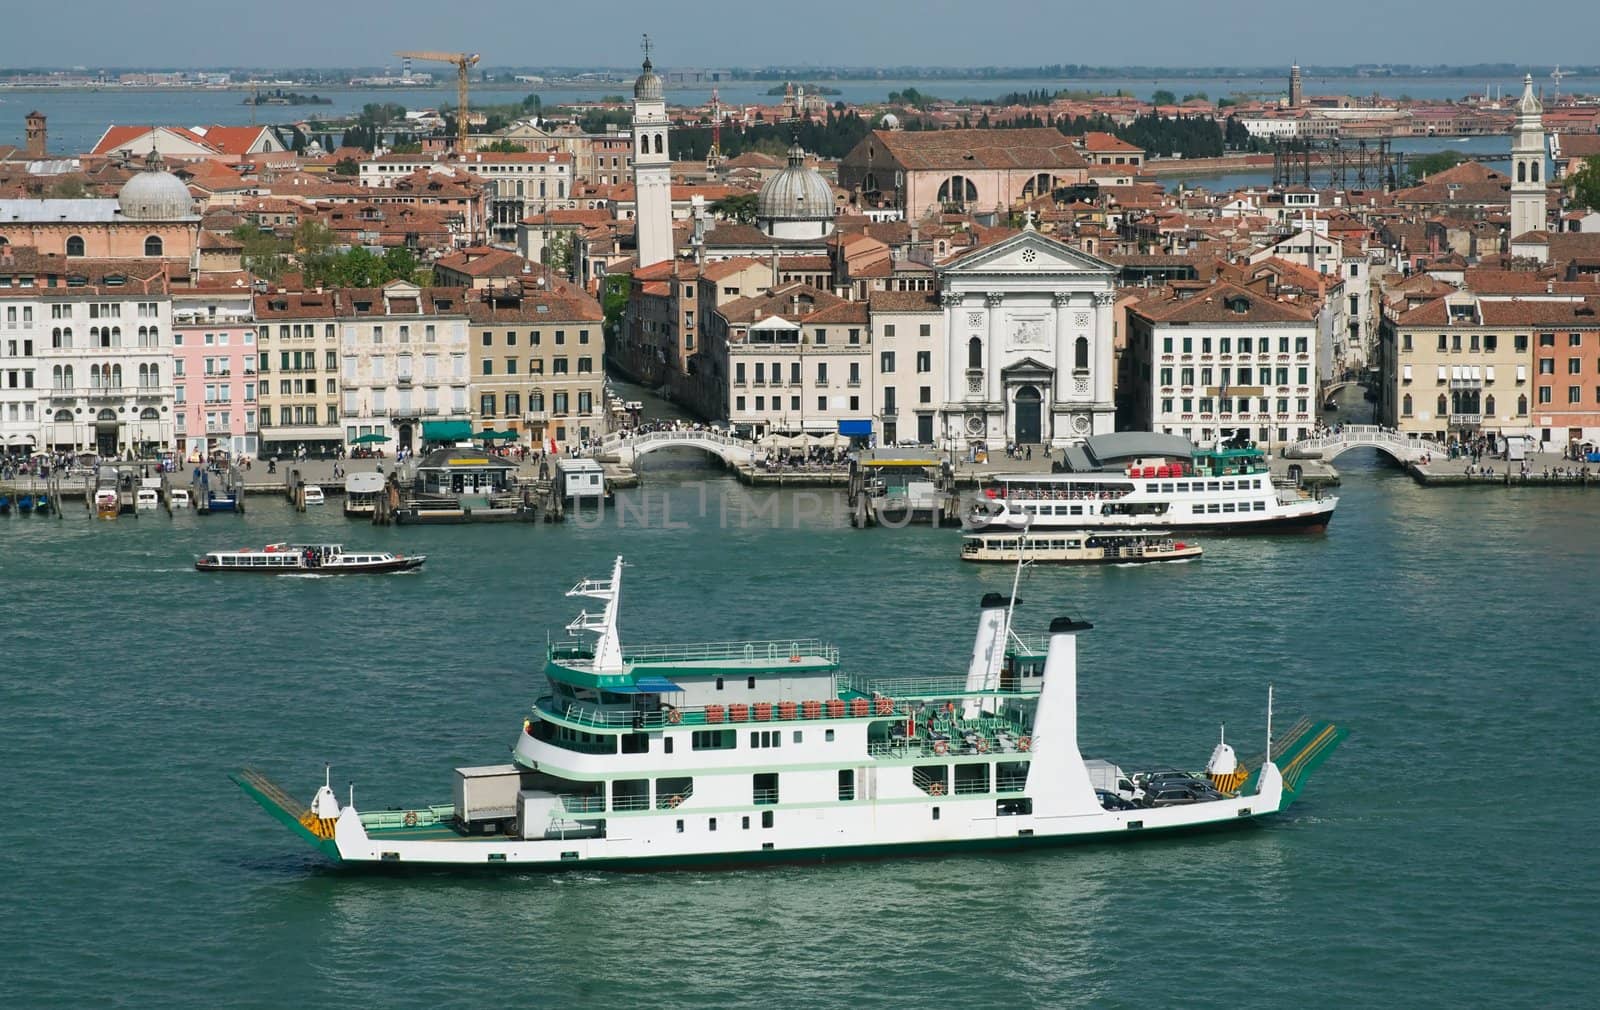 Panorama of Venice with a ferry boat in the foreground